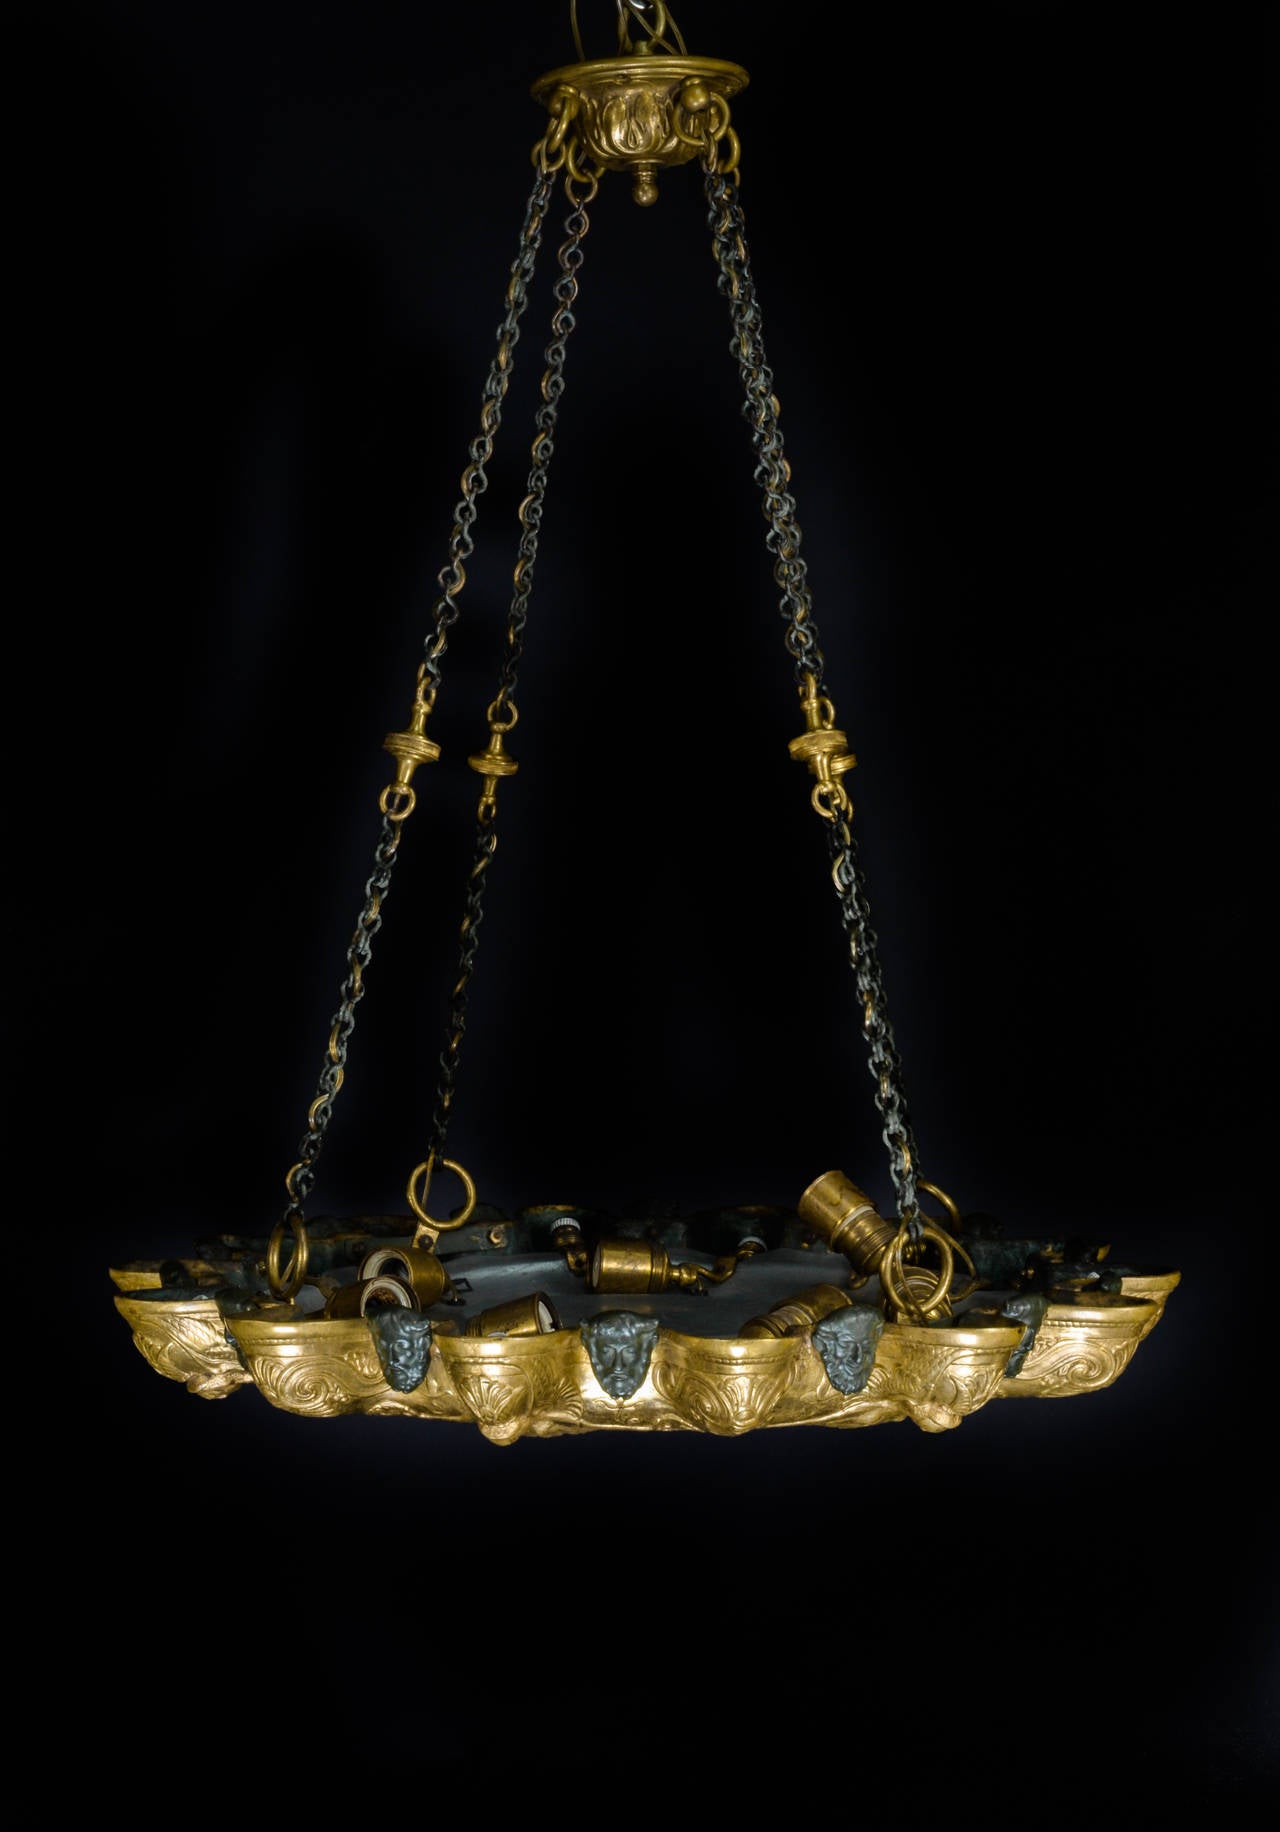 Unique Antique American Caldwell Neoclassical Gilt and Patina Bronze Chandelier For Sale 1